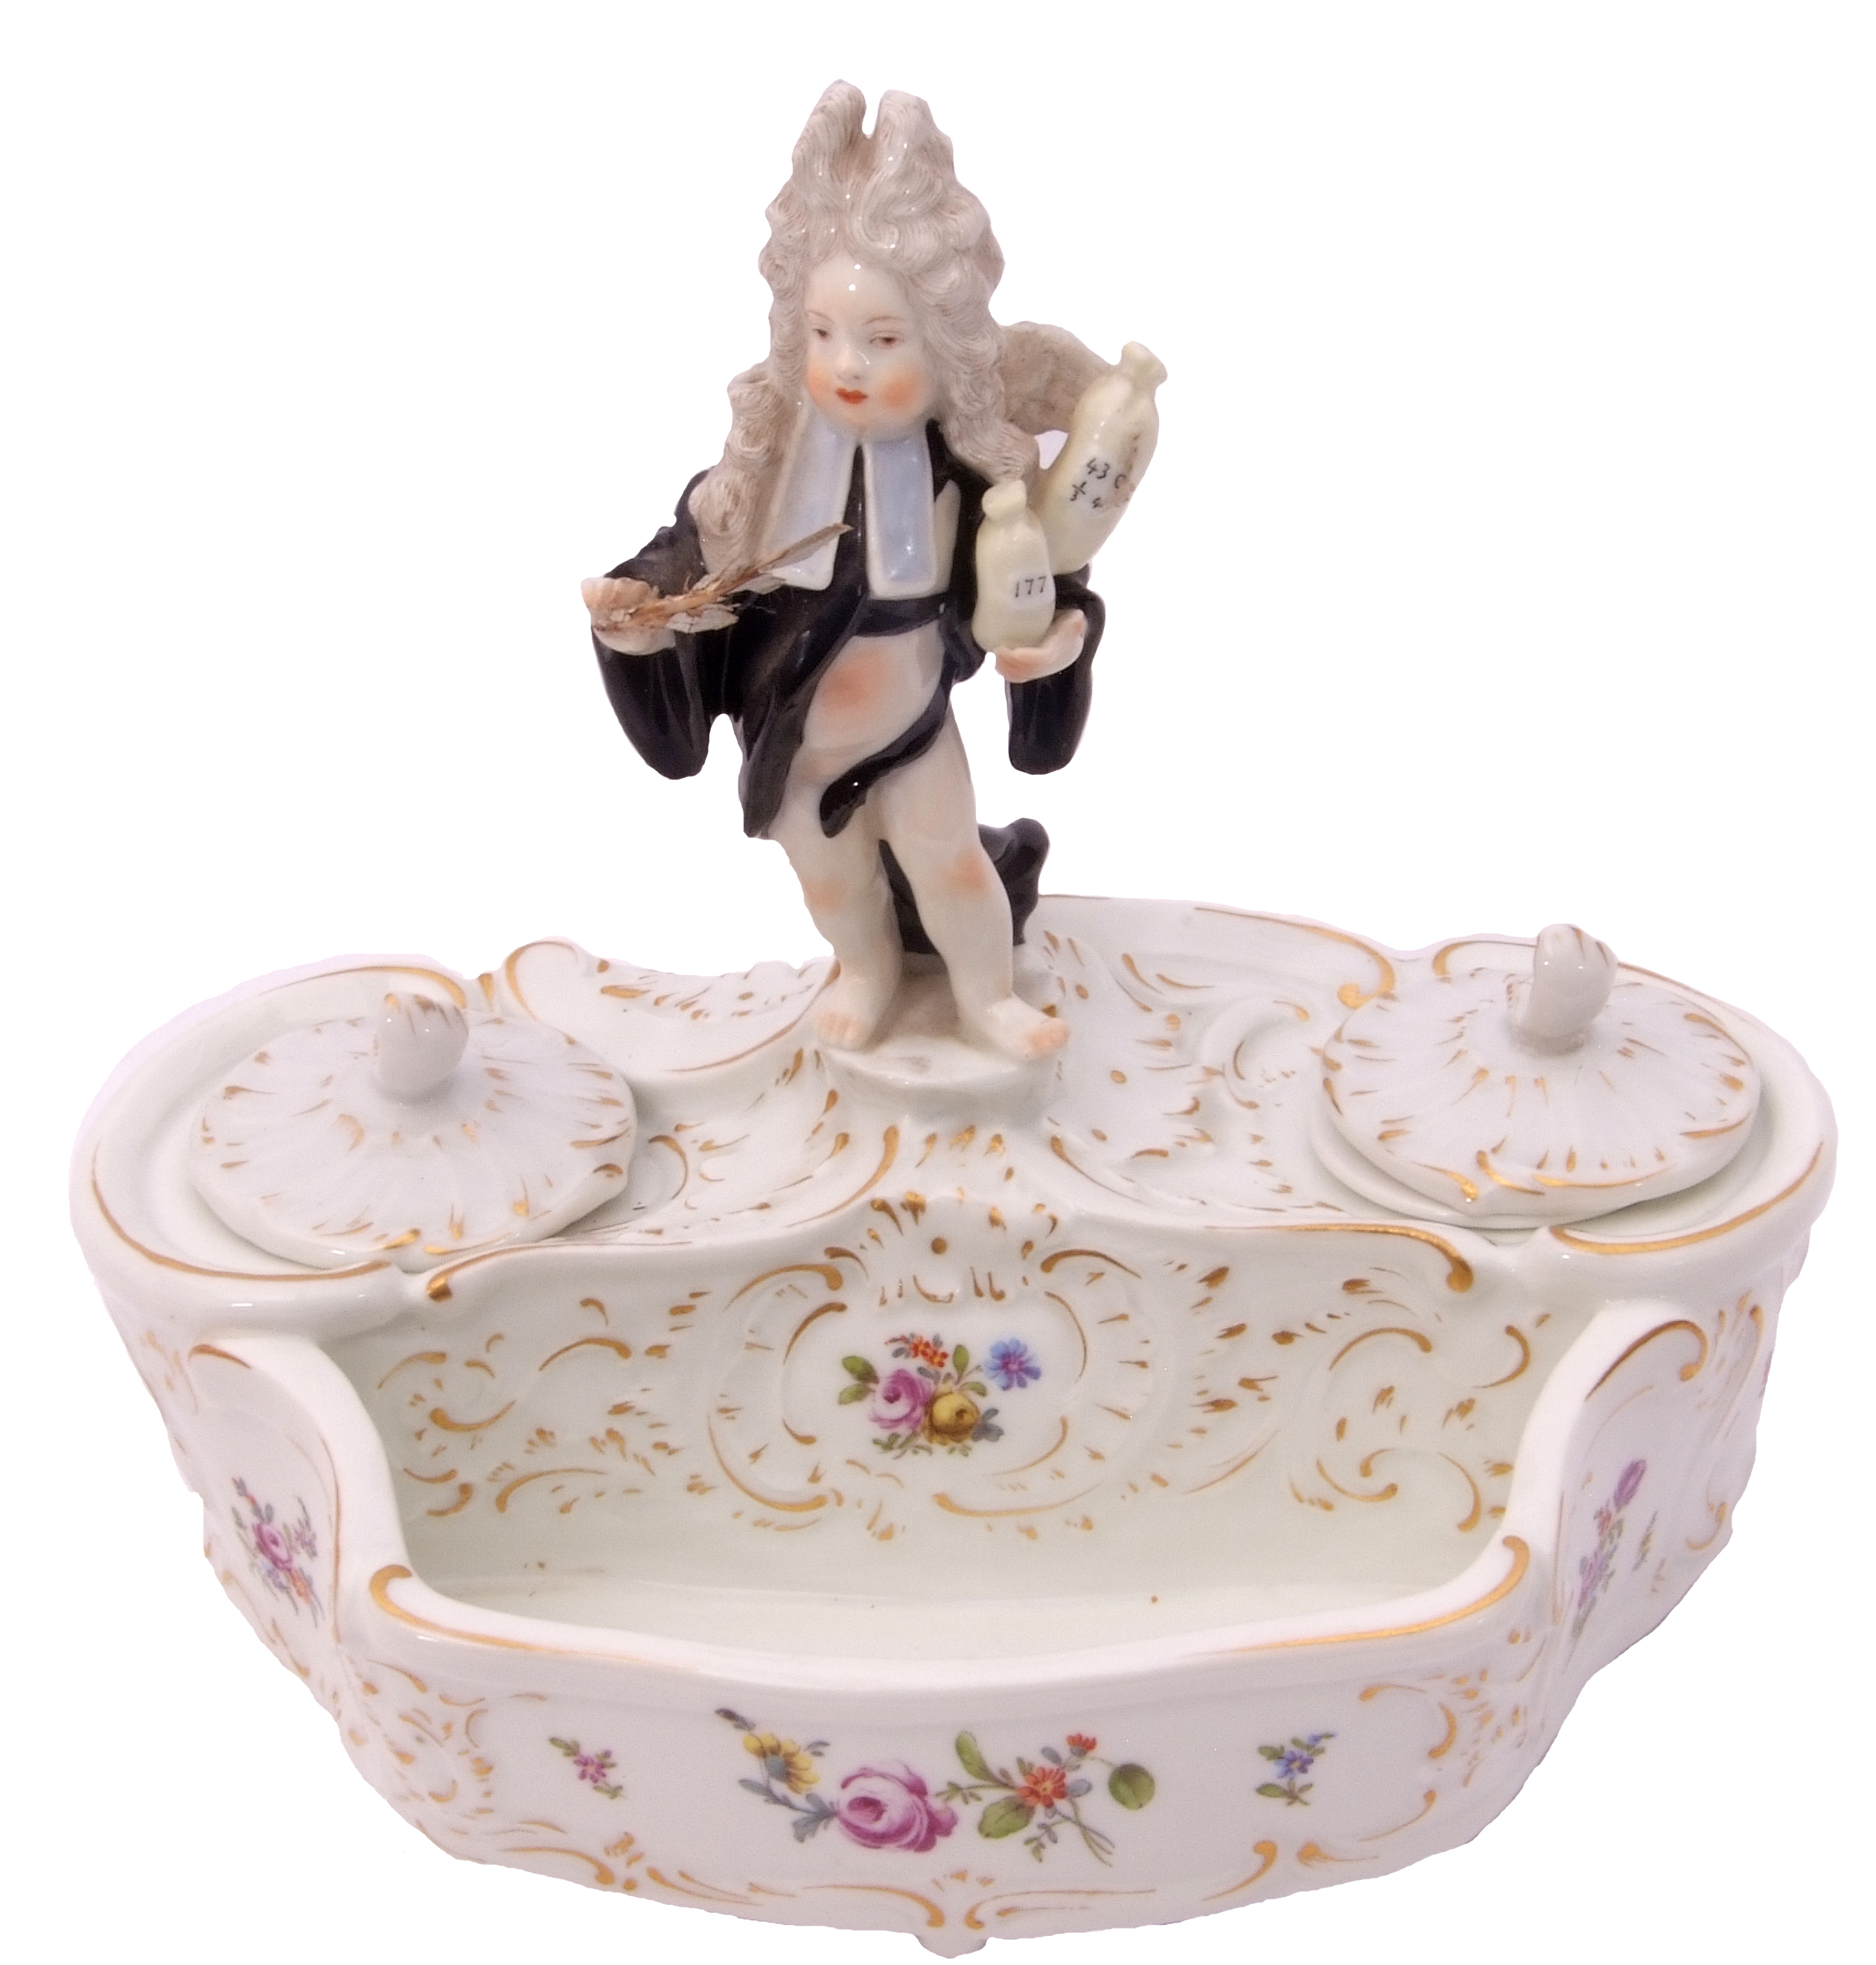 19th century Meissen style inkwell and pen tray with a cupid in disguise figure modelled as an - Image 3 of 6